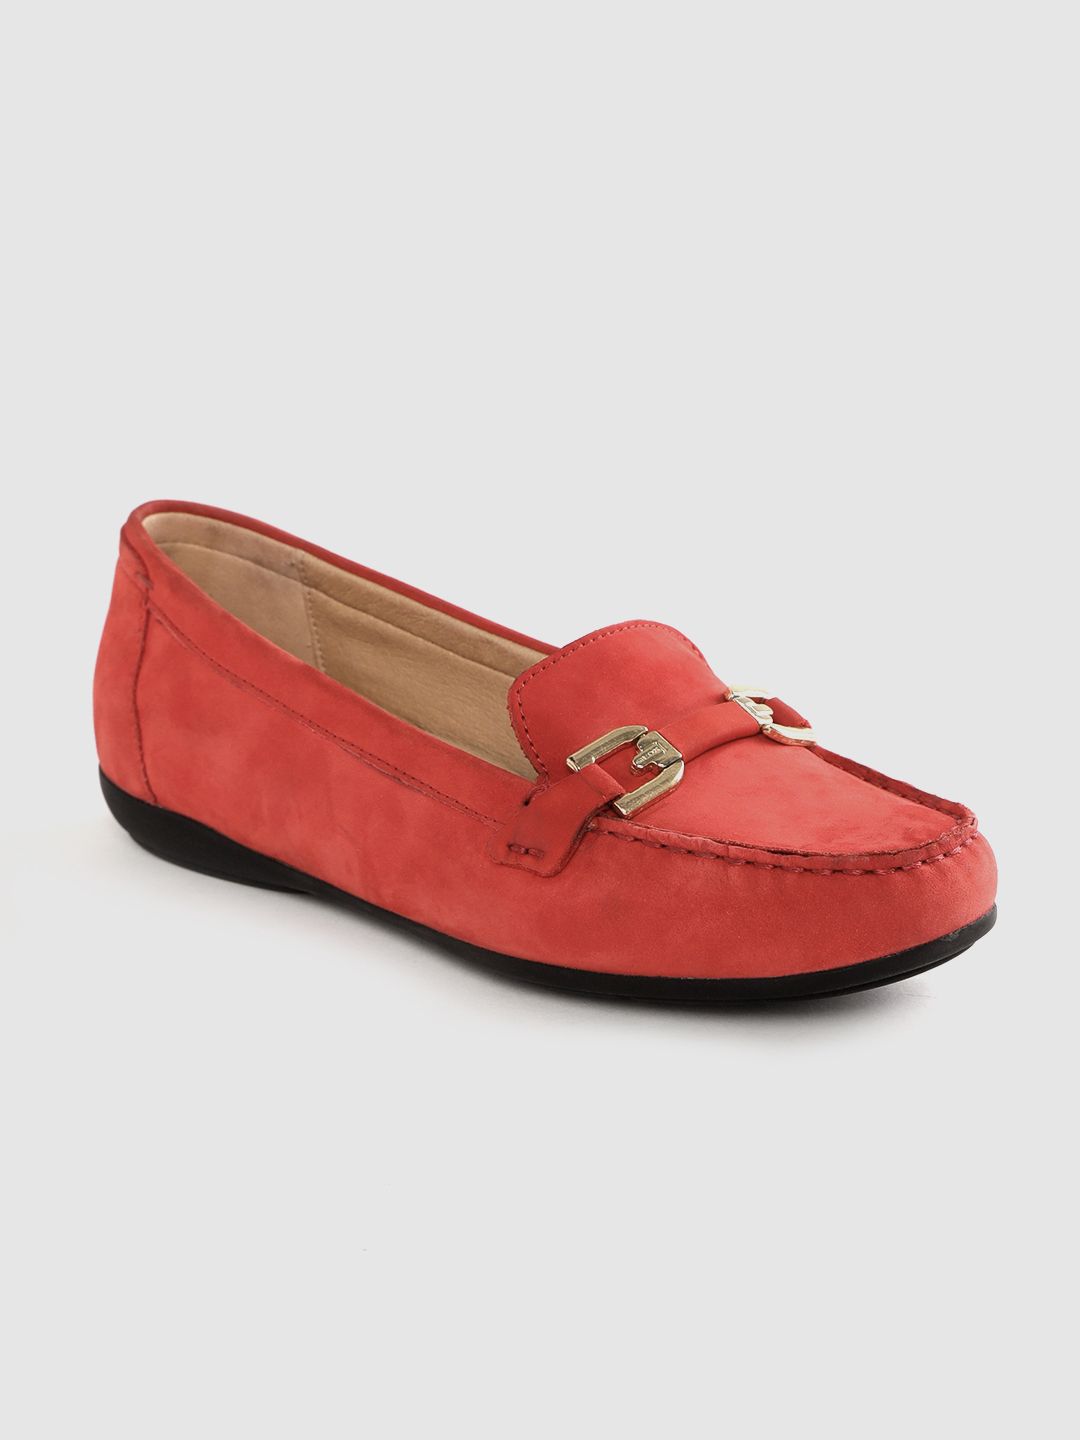 Geox Women Red Leather Solid Loafers Price in India